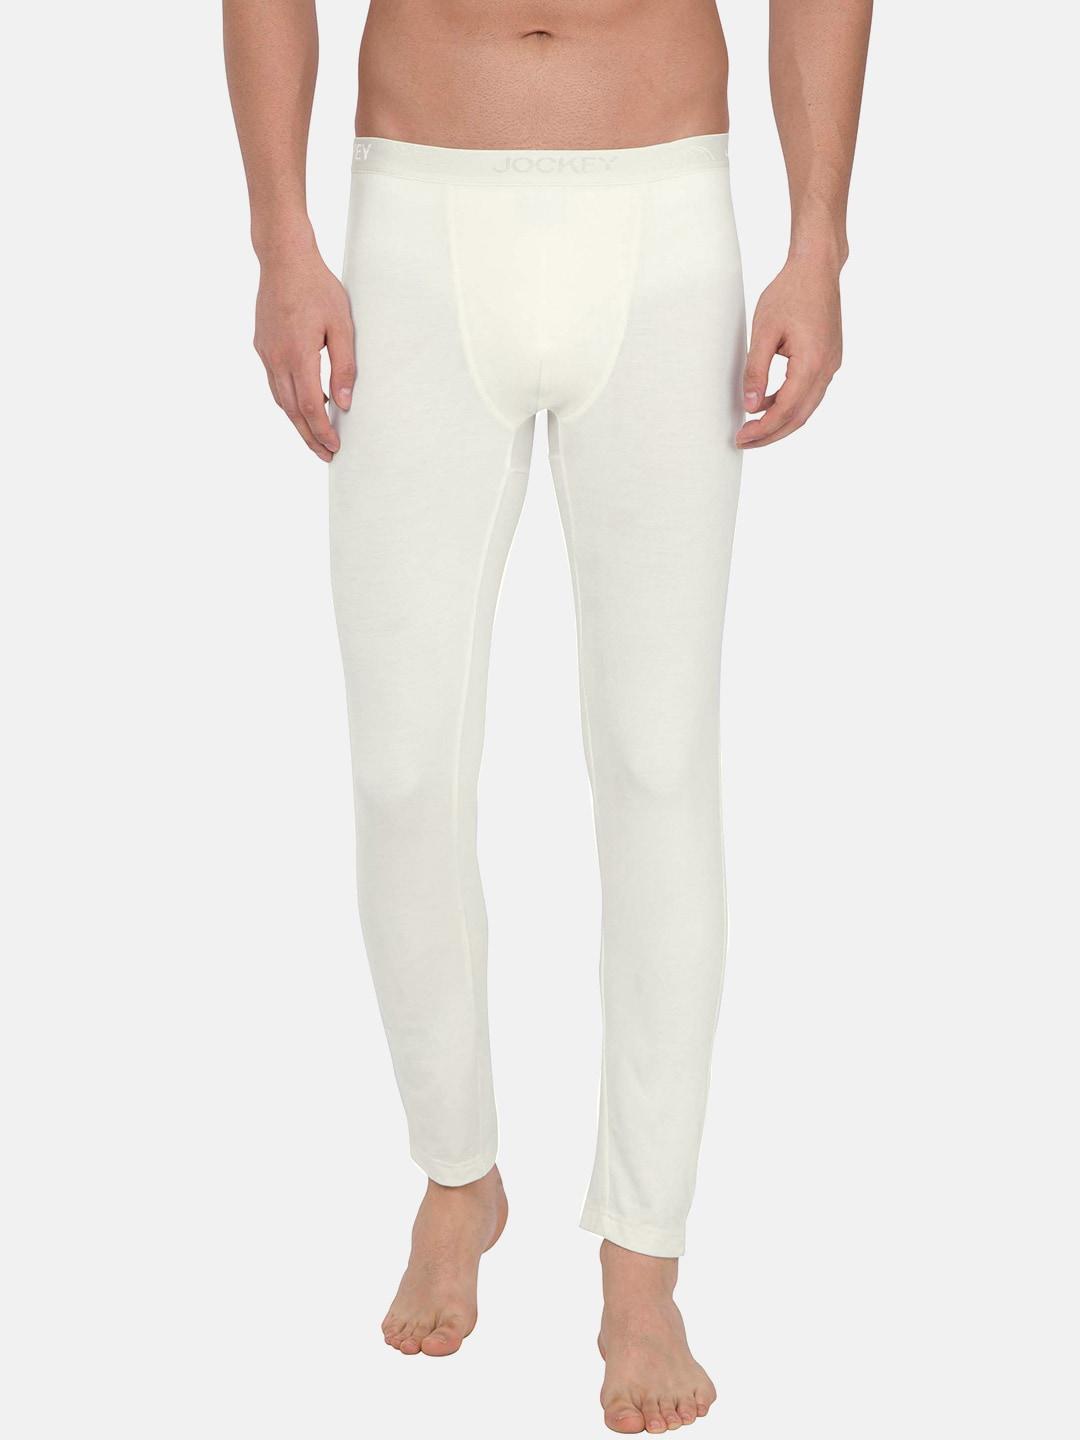 jockey thermals men cream-coloured solid thermal bottoms 2622-0105